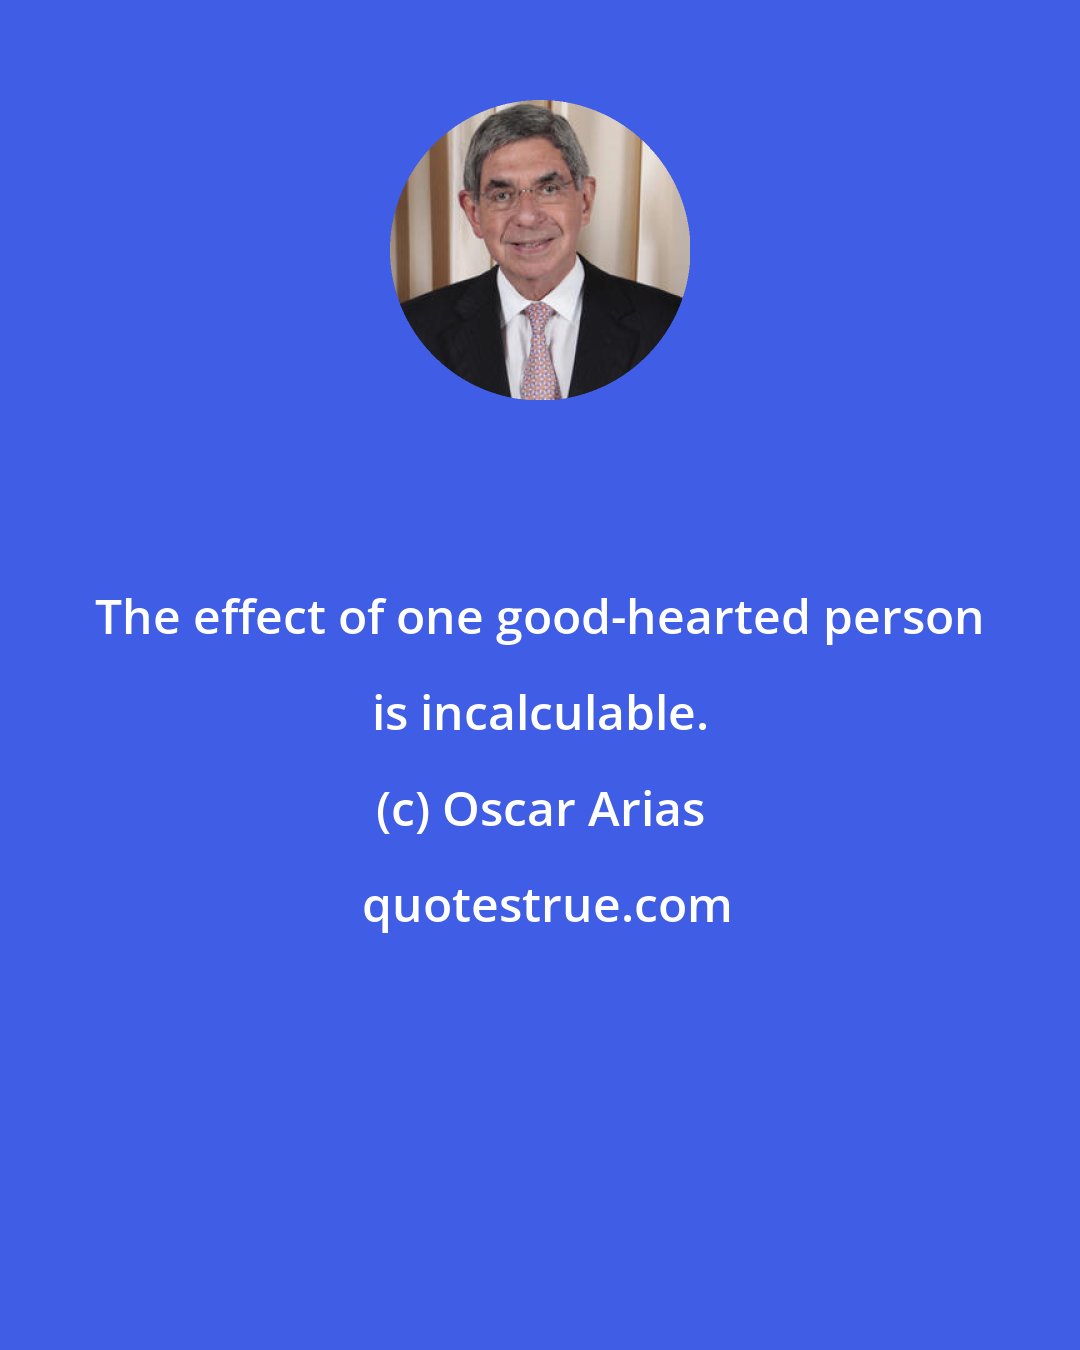 Oscar Arias: The effect of one good-hearted person is incalculable.